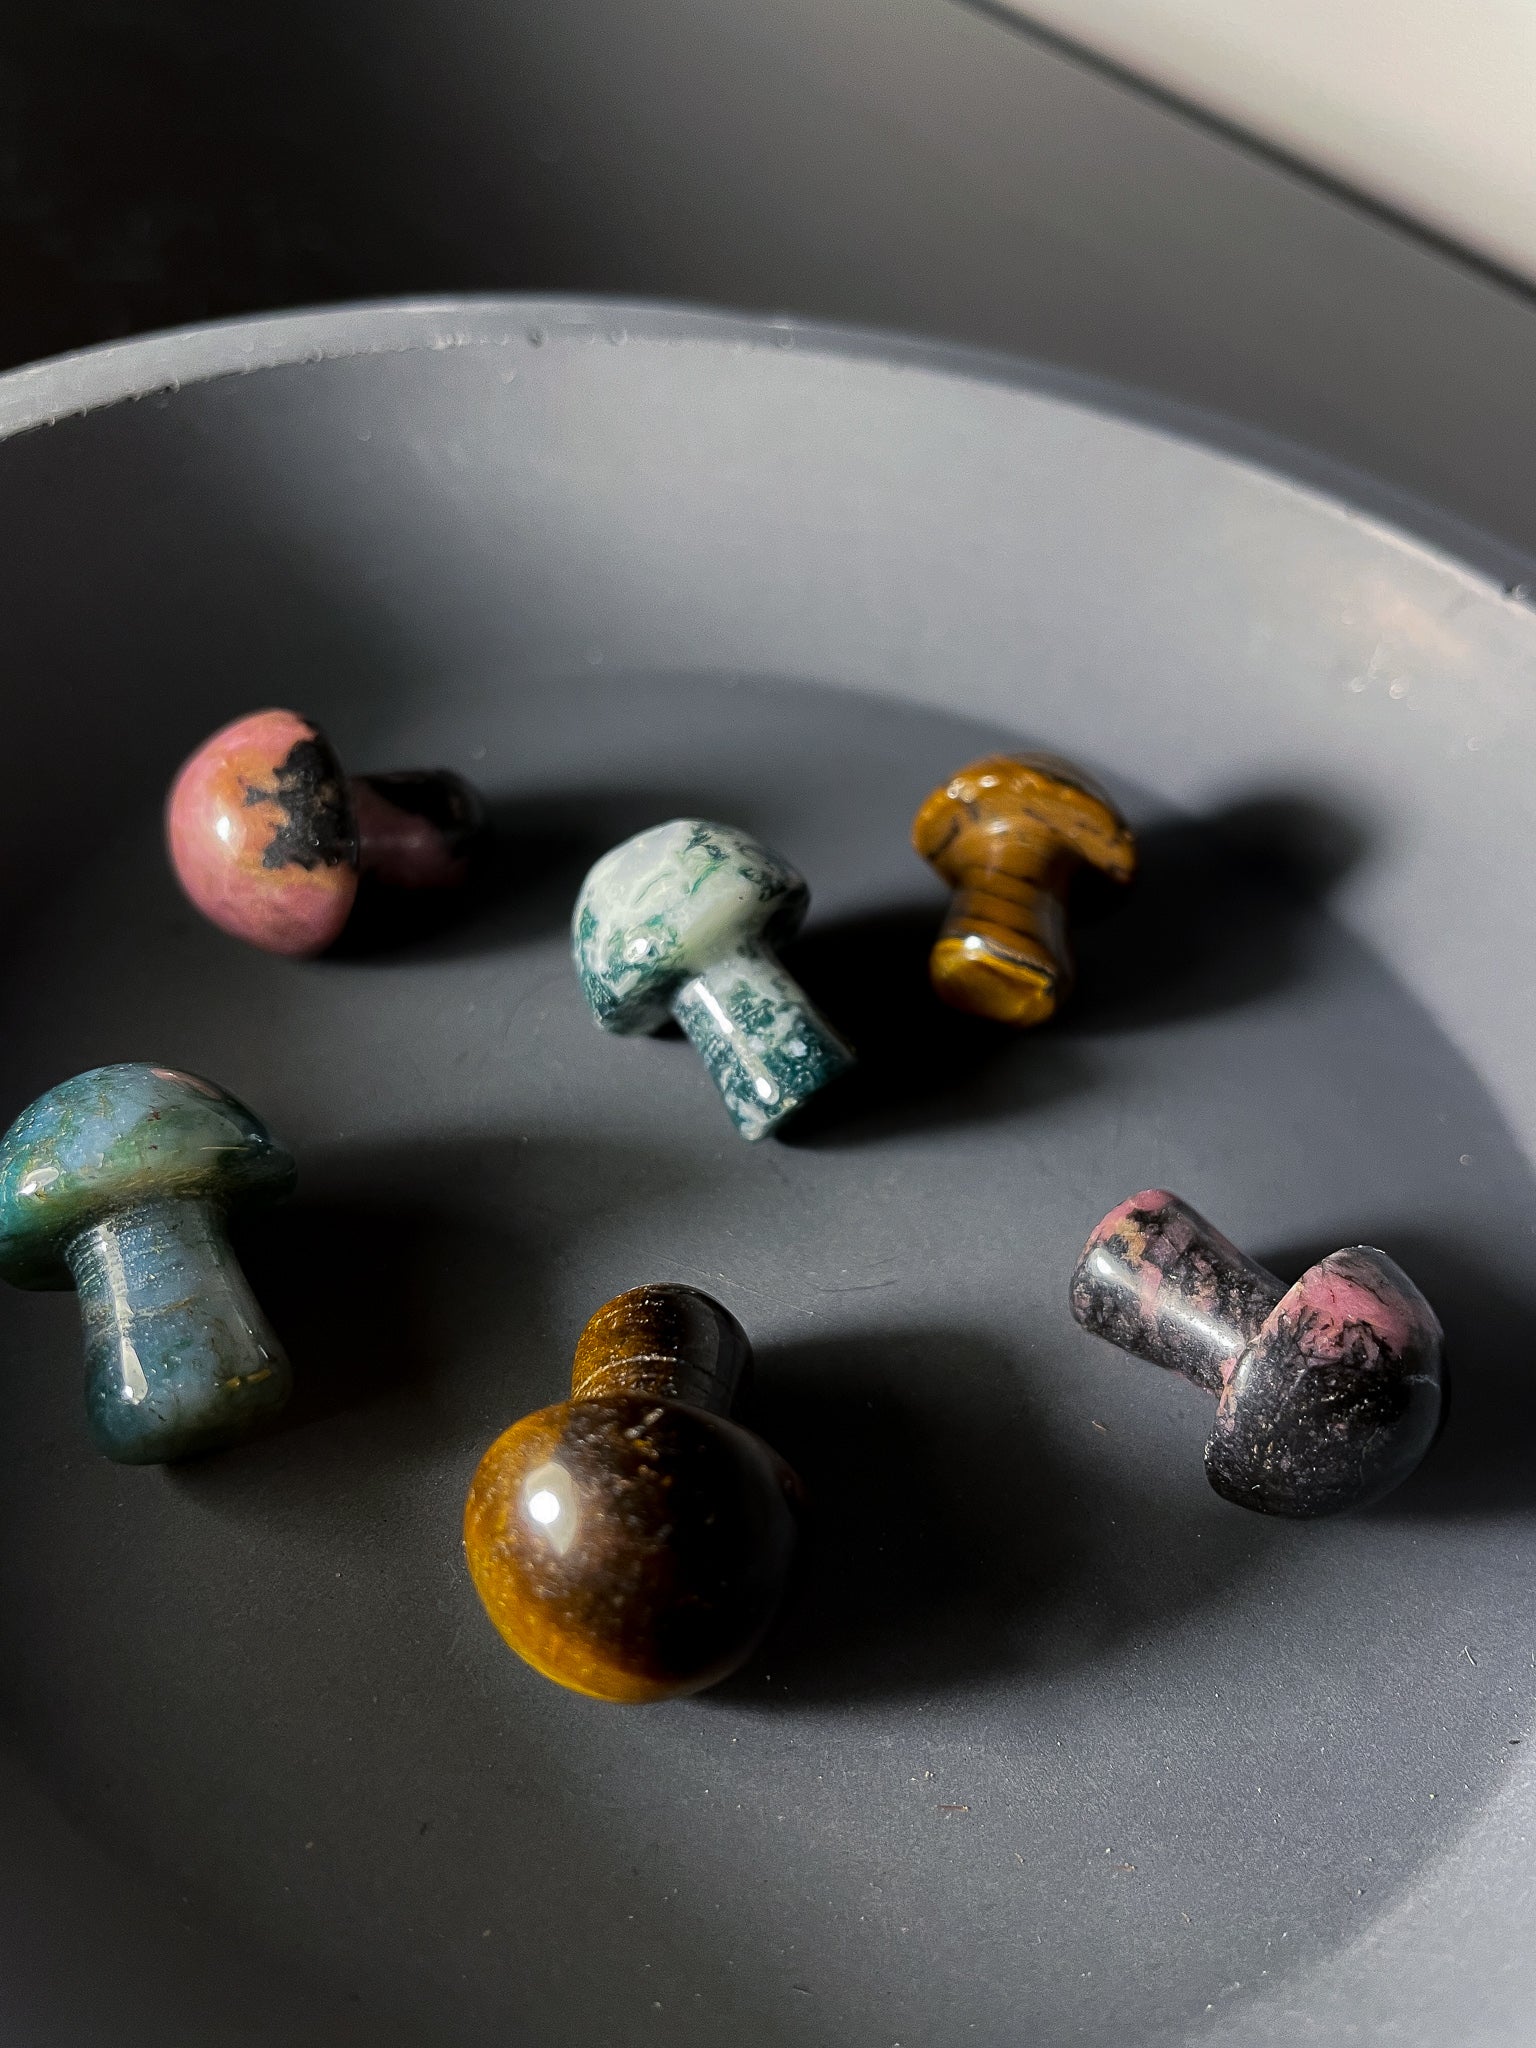 A photo of a group of miniature crystal mushrooms, each made from a different type of crystal or mineral. Each mushroom has a rounded cap and a short stem, and has been polished to a smooth and shiny finish. 